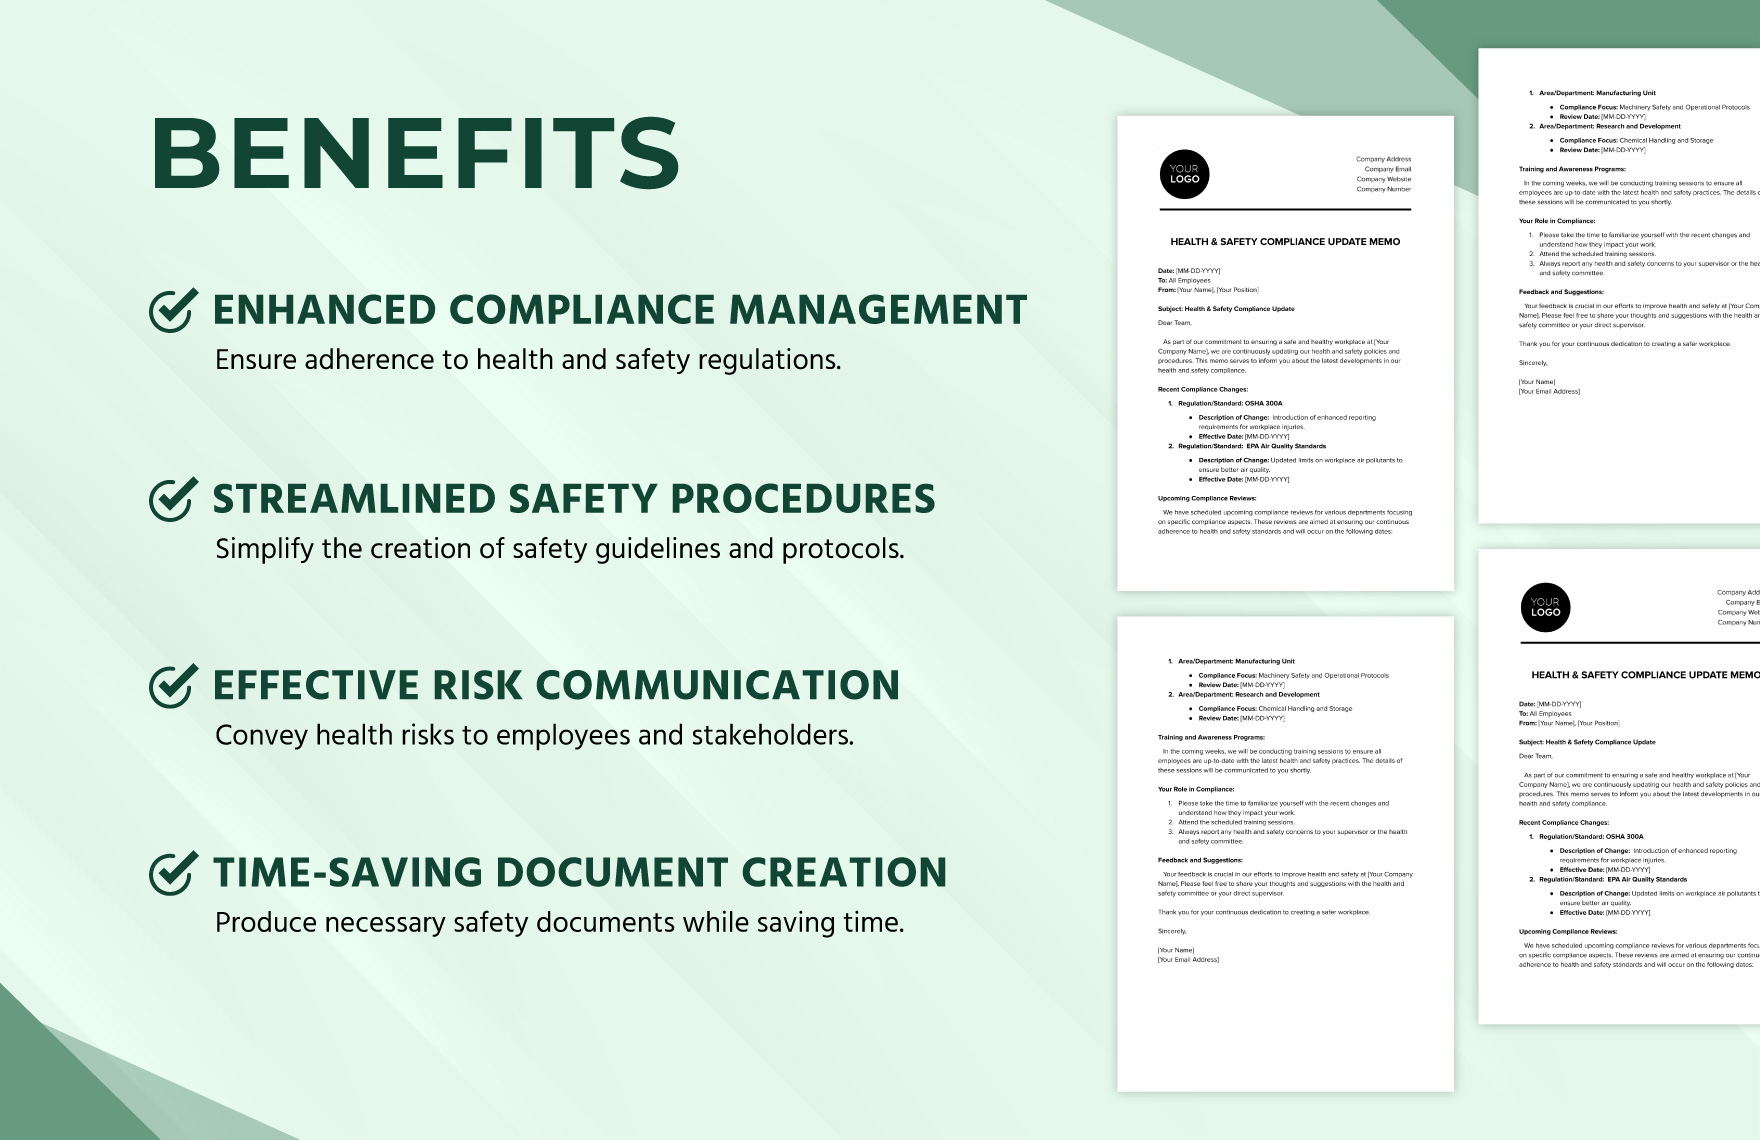 Health Safety Compliance Update Memo Template